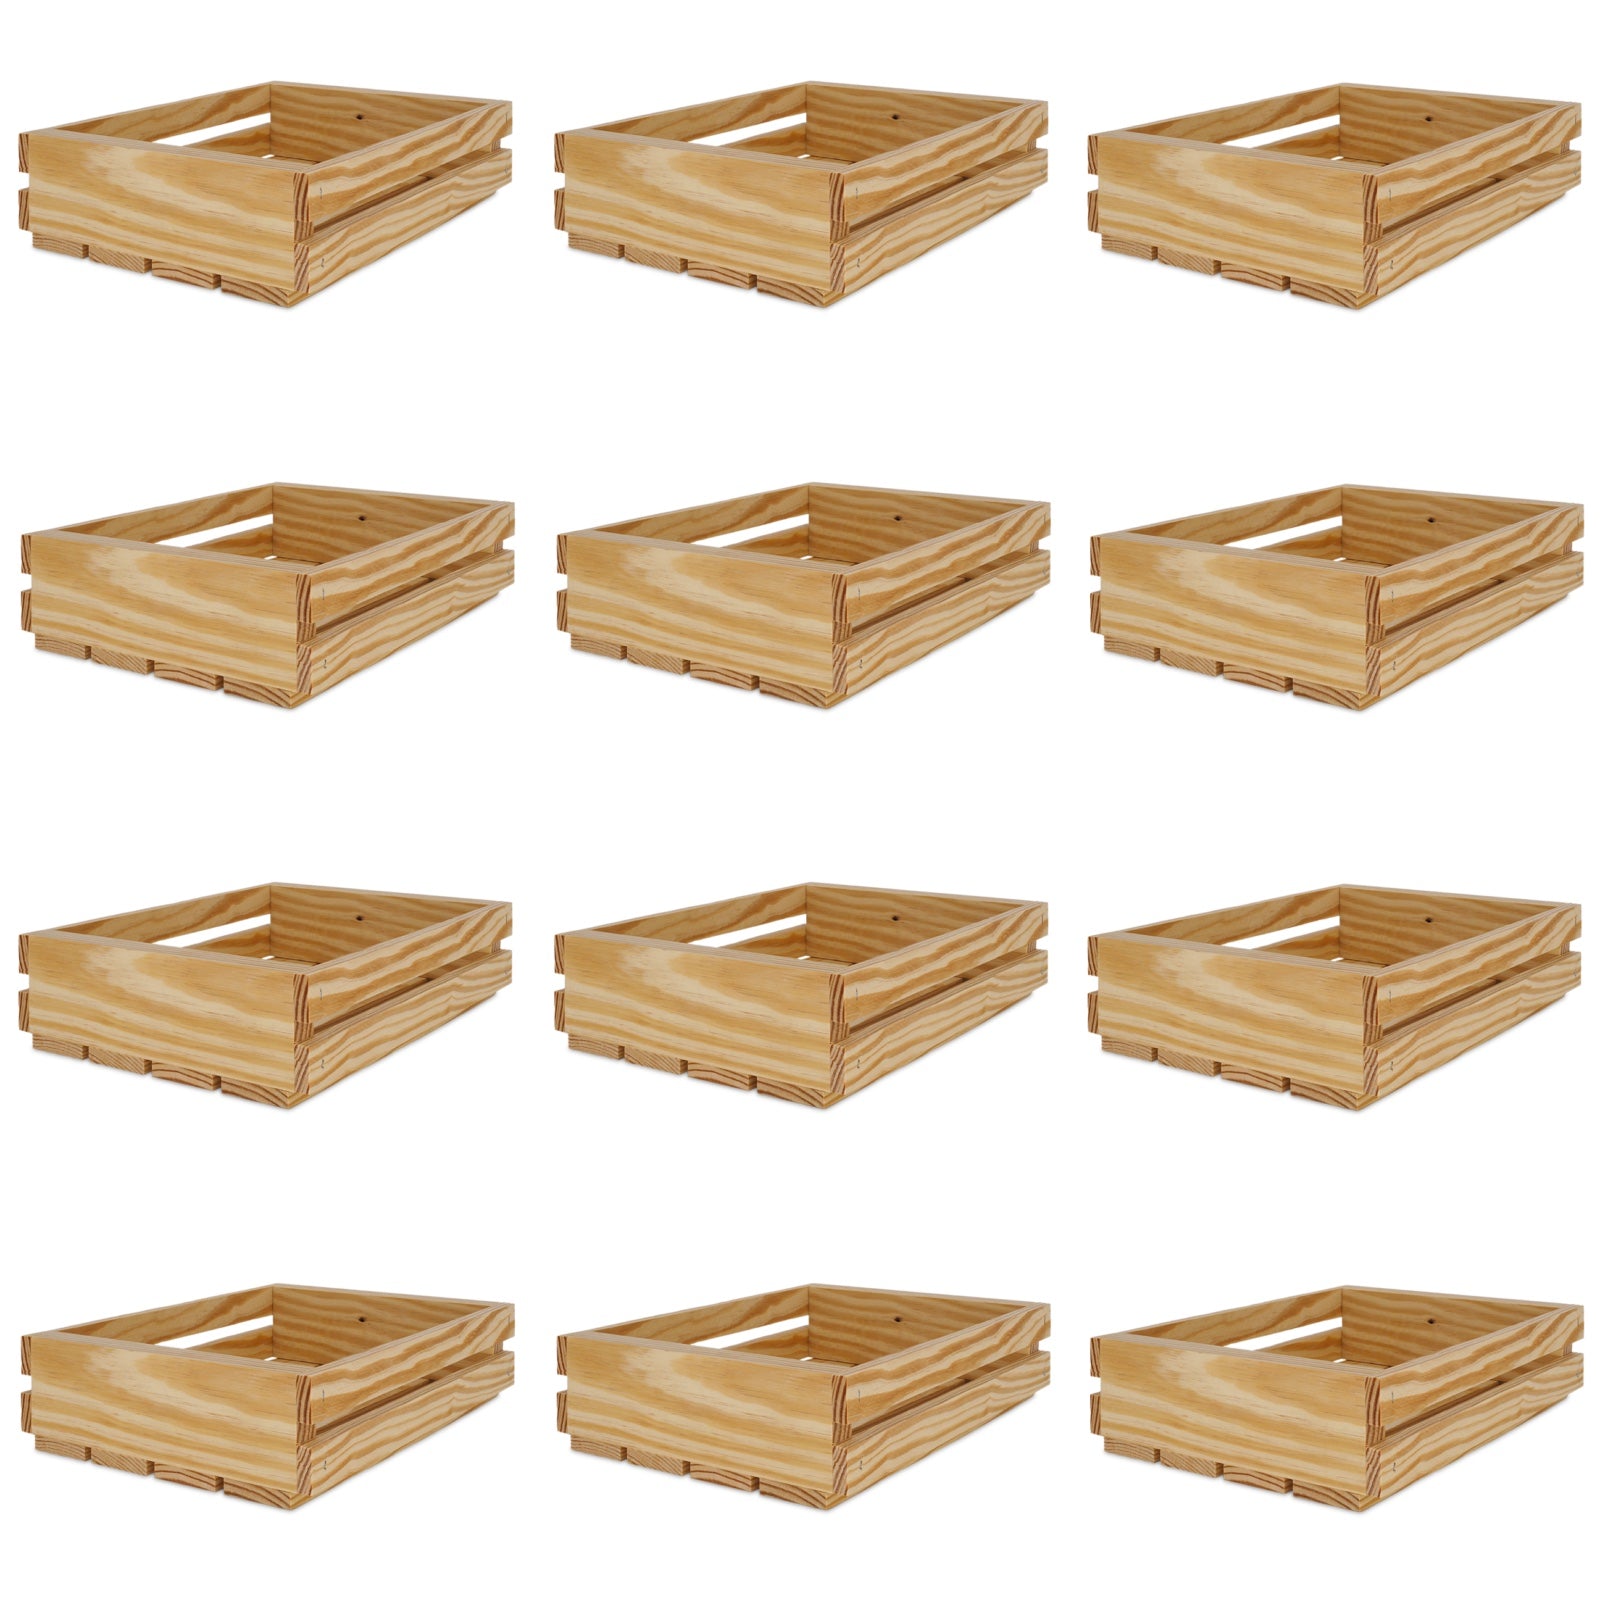 12 Small wooden crates 10x8x2.5